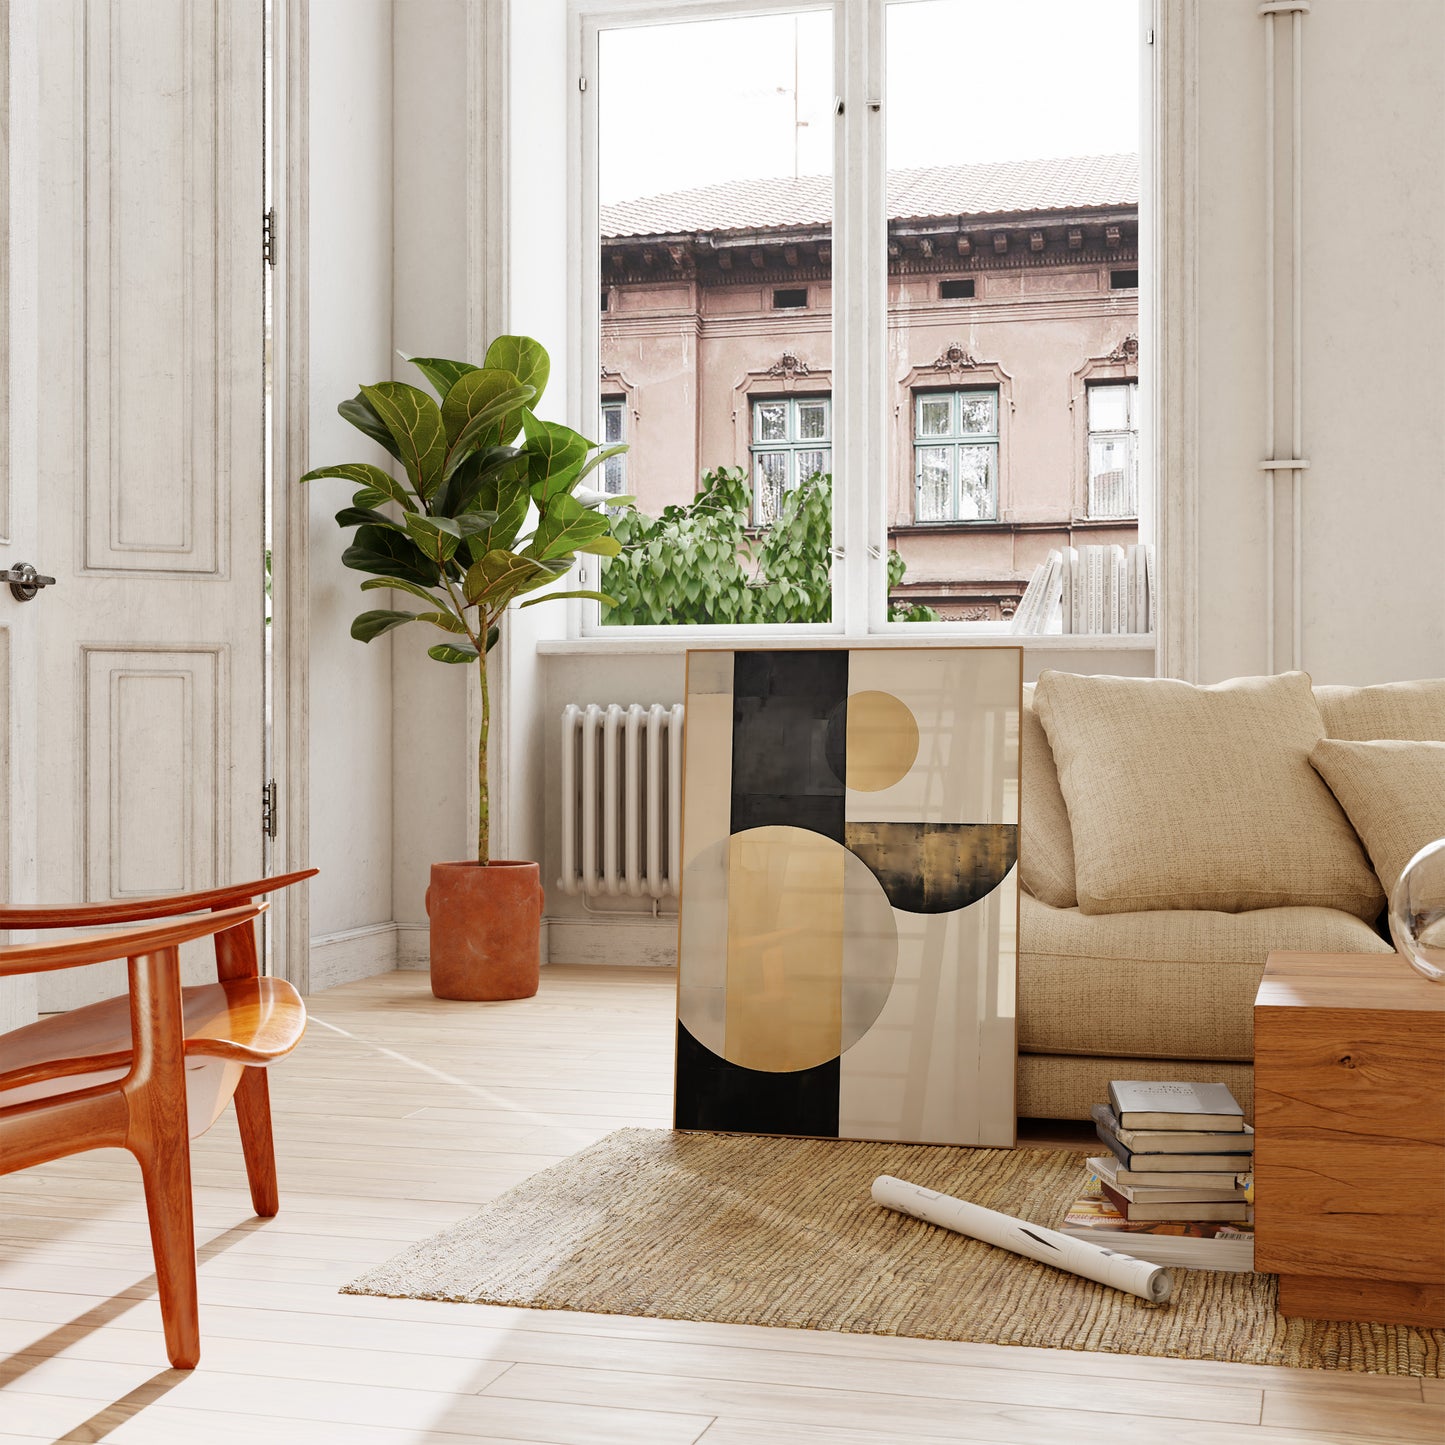 Bright, cozy living room with modern furniture and a potted plant.